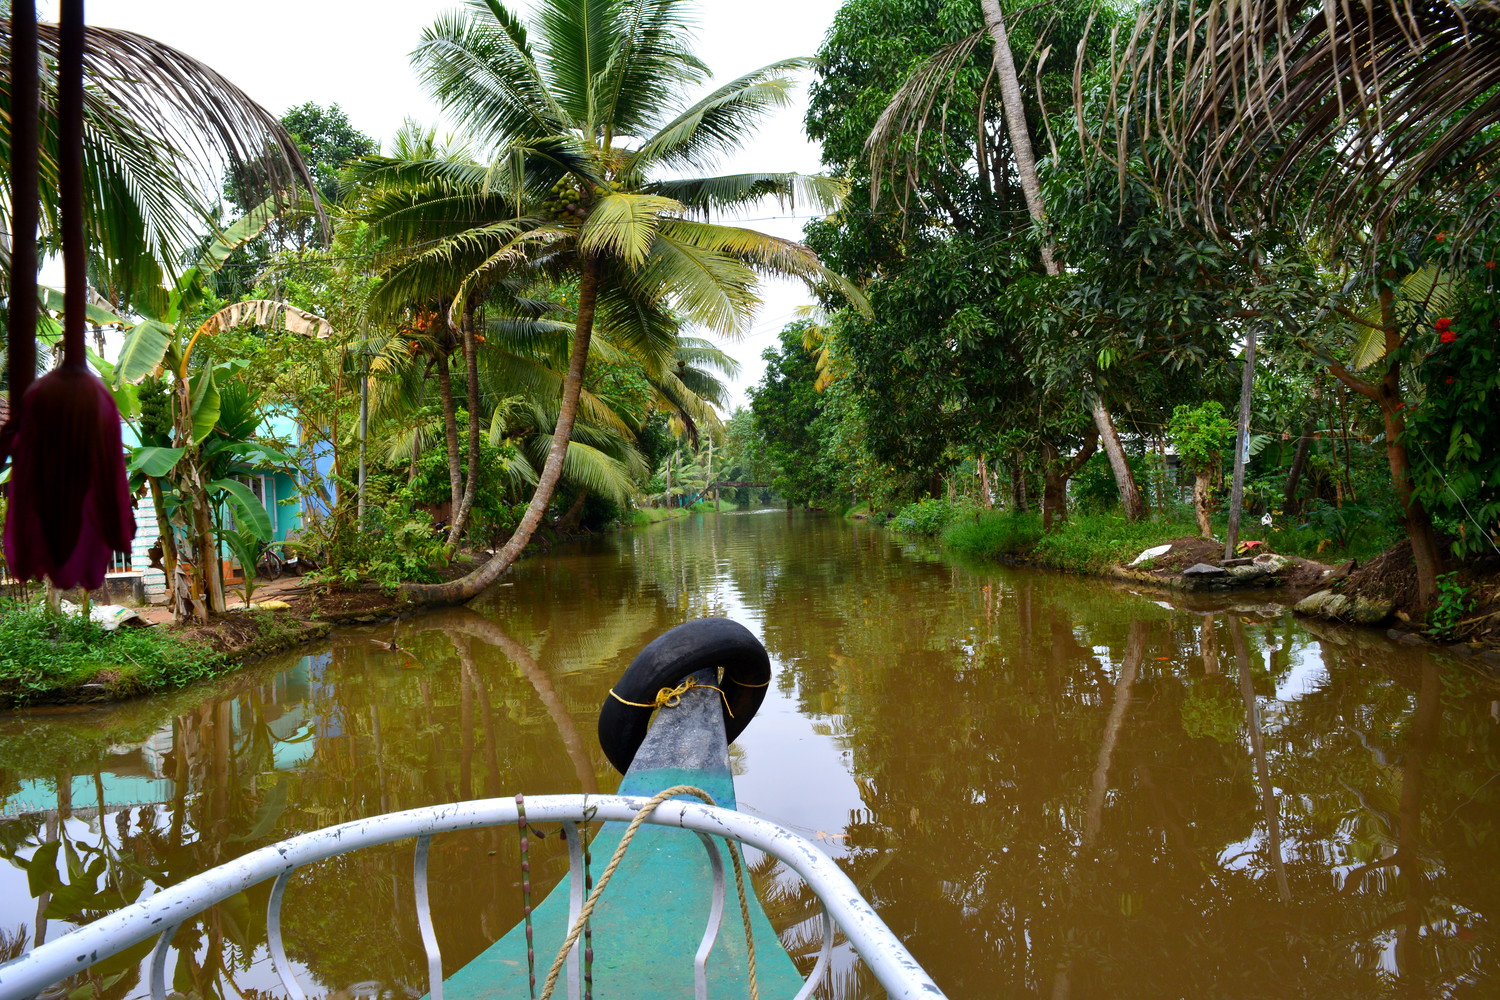 Canal with trees on both sides and an arching coconut palm tree leaning into the canal on the left side visible from inside a boat